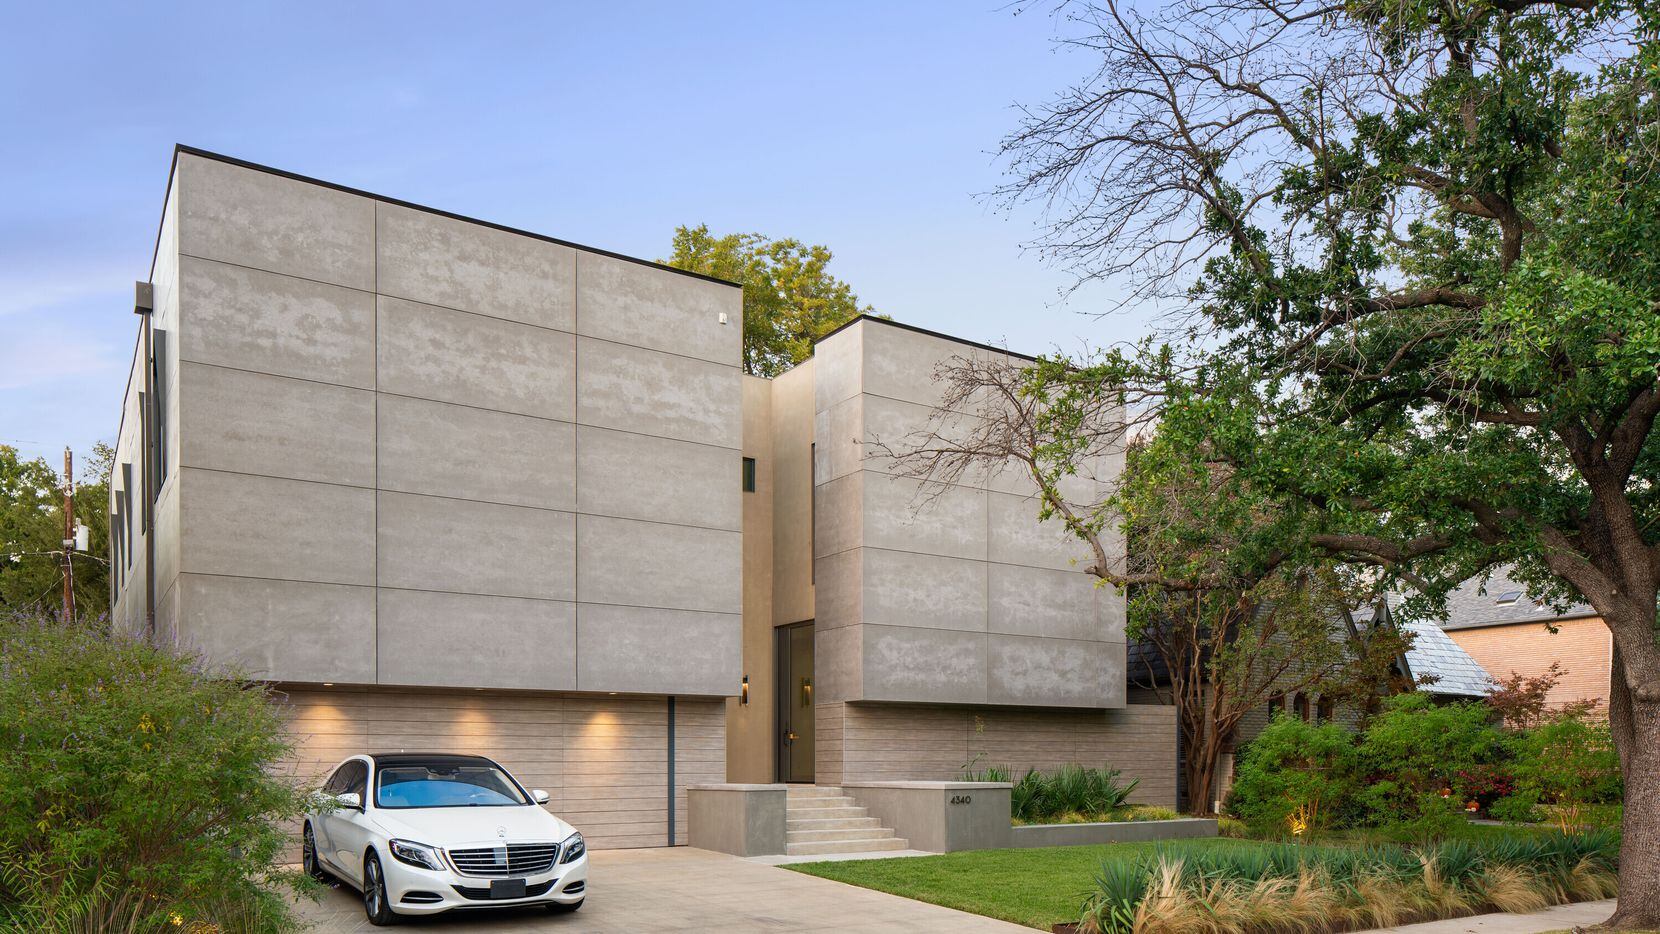 Take a look at the home at 4340 Fairfax Ave. in Highland Park.